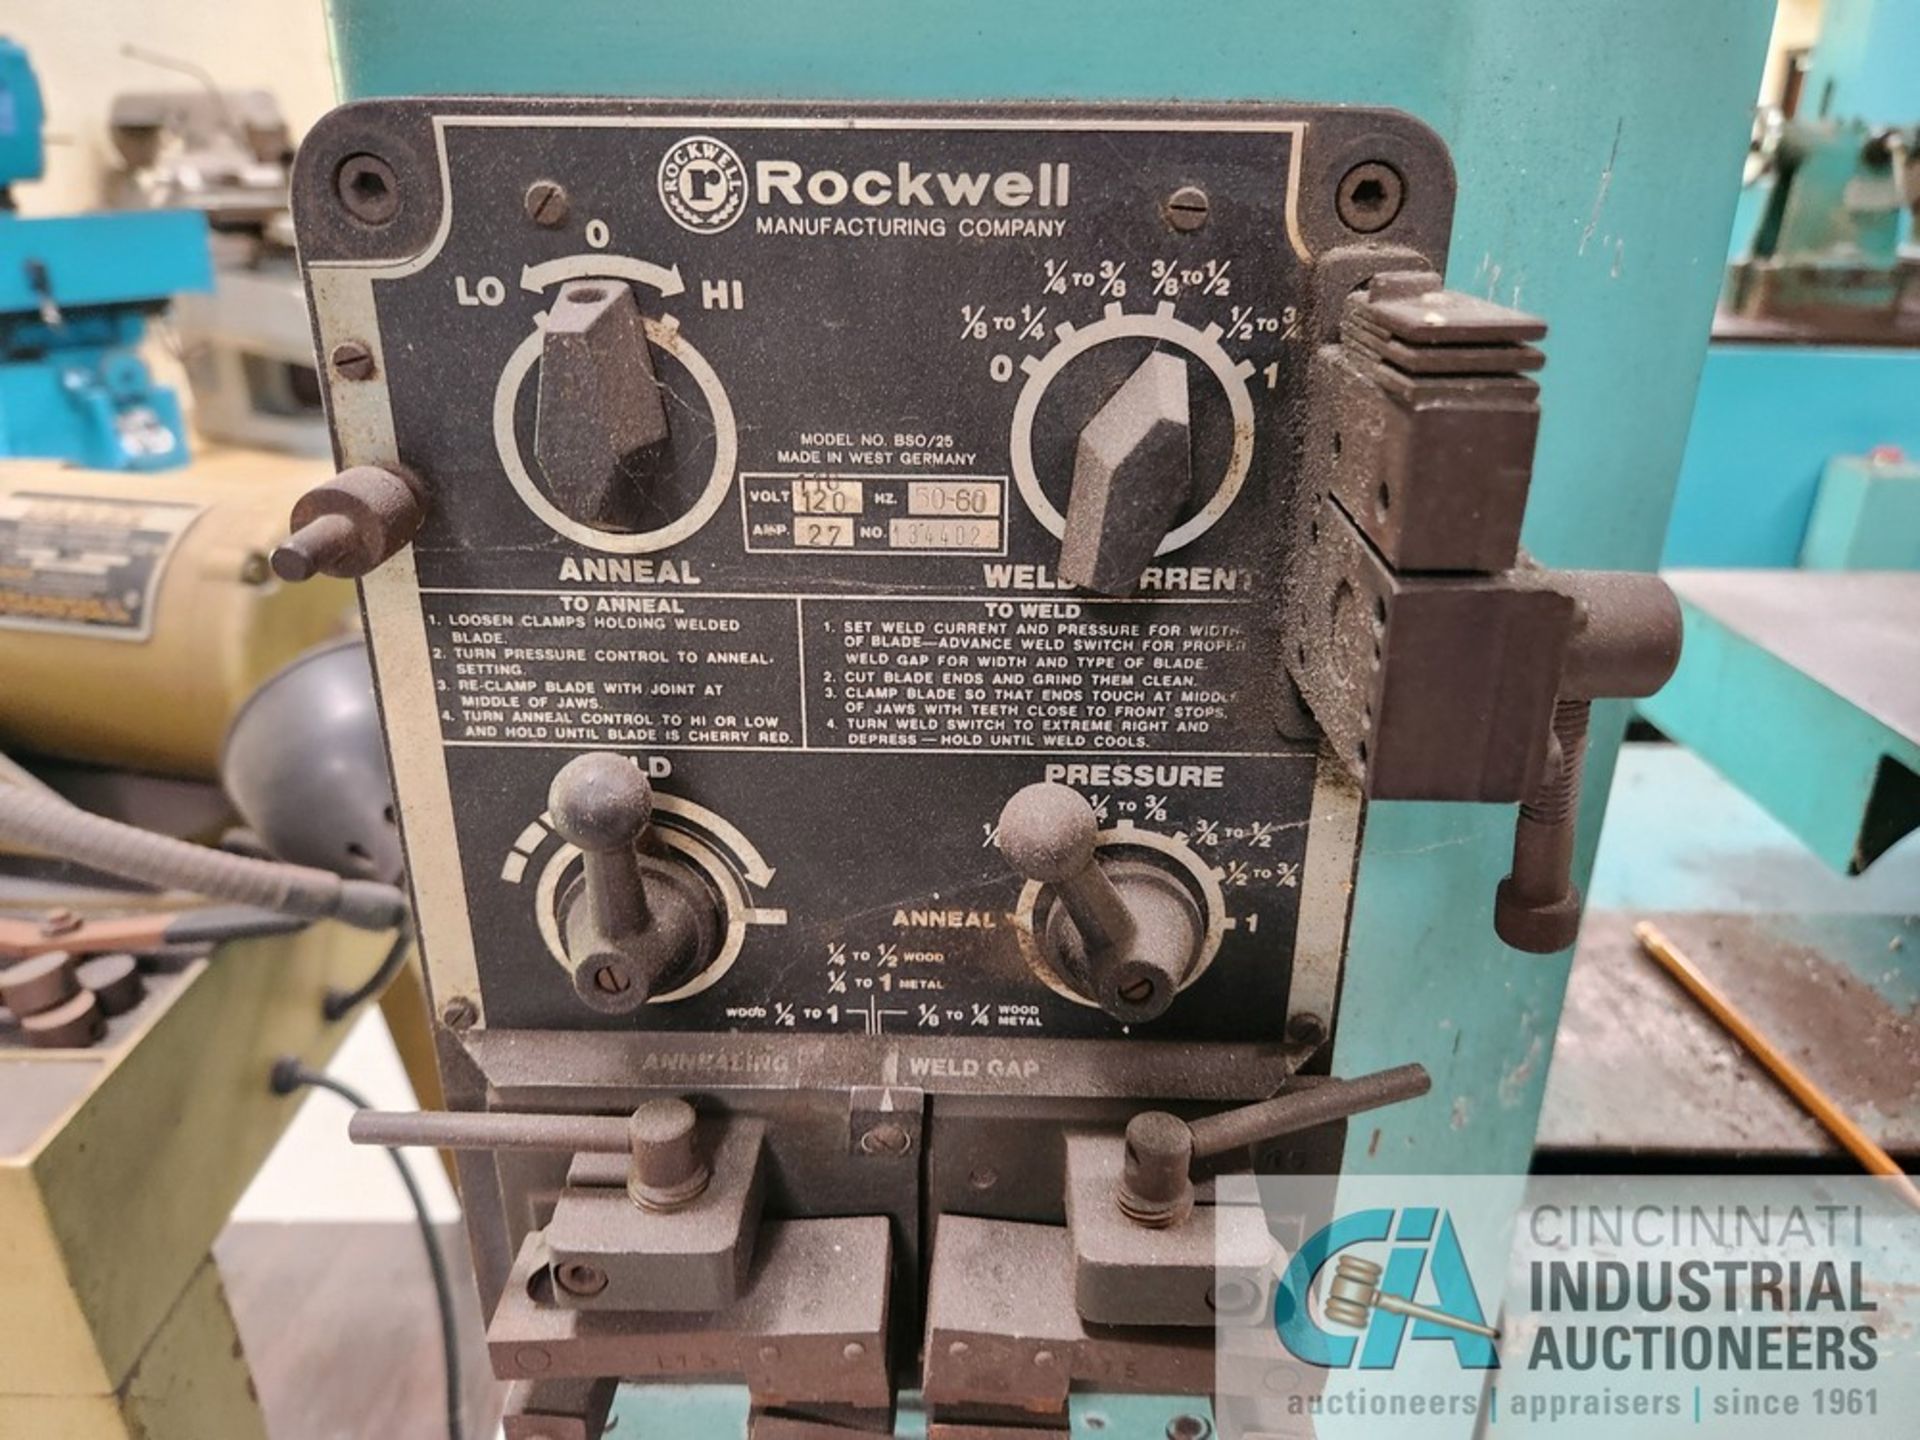 20" ROCKWELL SERIES 28-3X5 VERTICAL BAND SAW; S/N 15195/6, BLADE WELDER, 24" X 24" TABLE - Image 4 of 6